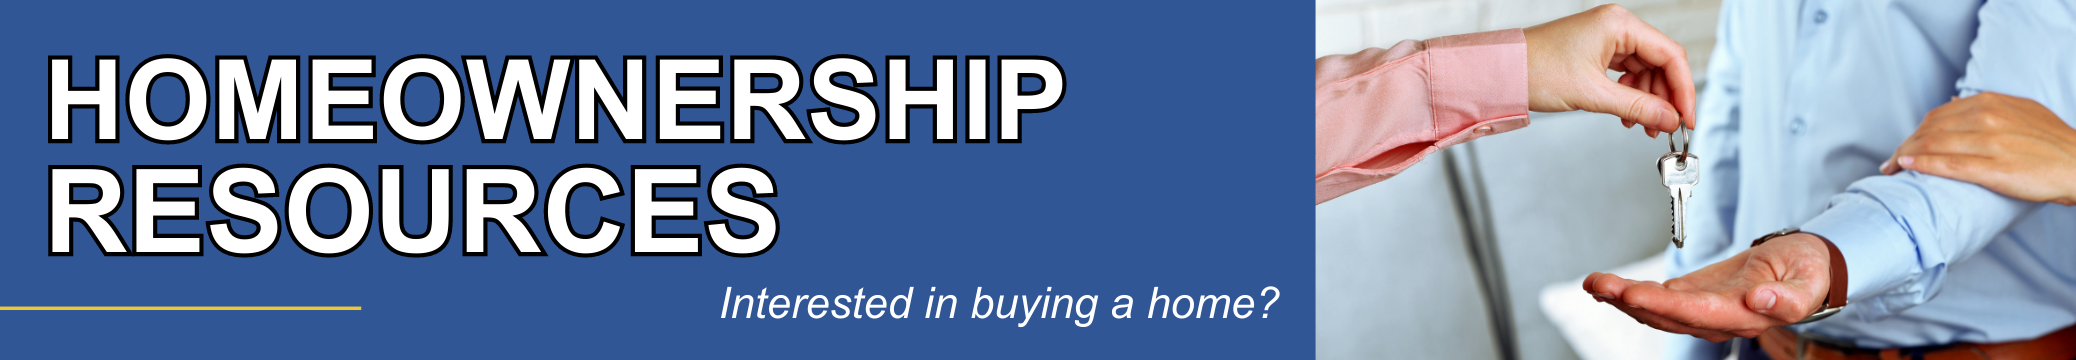 Homeownership Resources - Interested in buying a home?